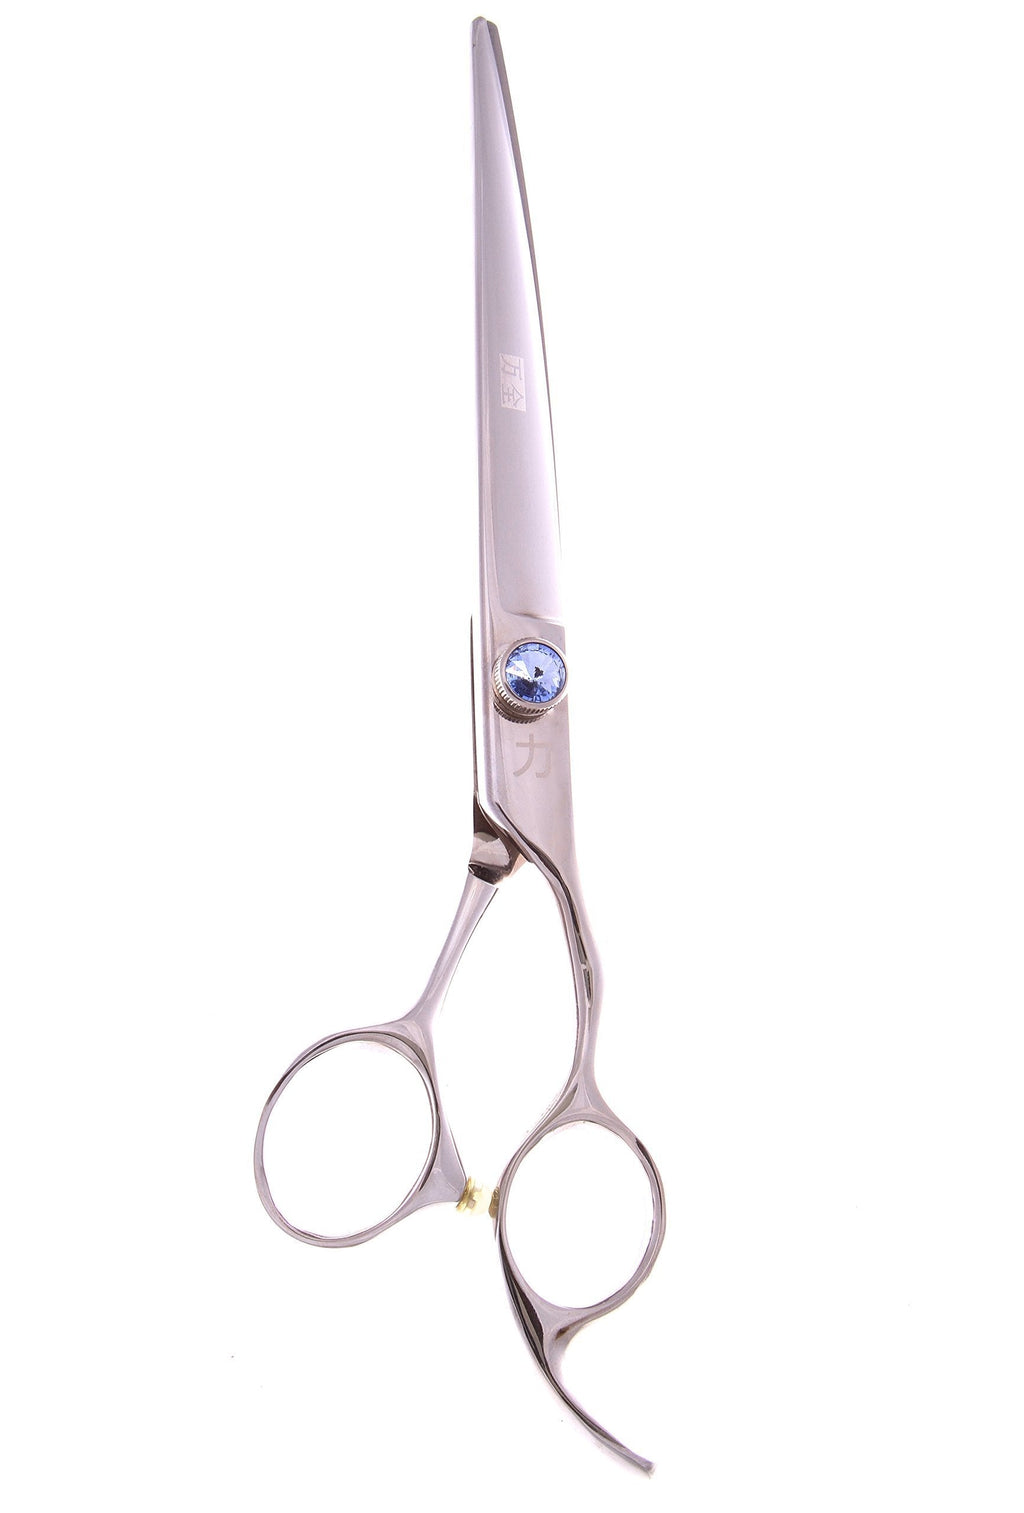 [Australia] - ShearsDirect Japanese 440C Curved Silver Titanium Cutting Shears with Blue Gem Stone Tension and Anatomic Thumb, 9.0-Inch 